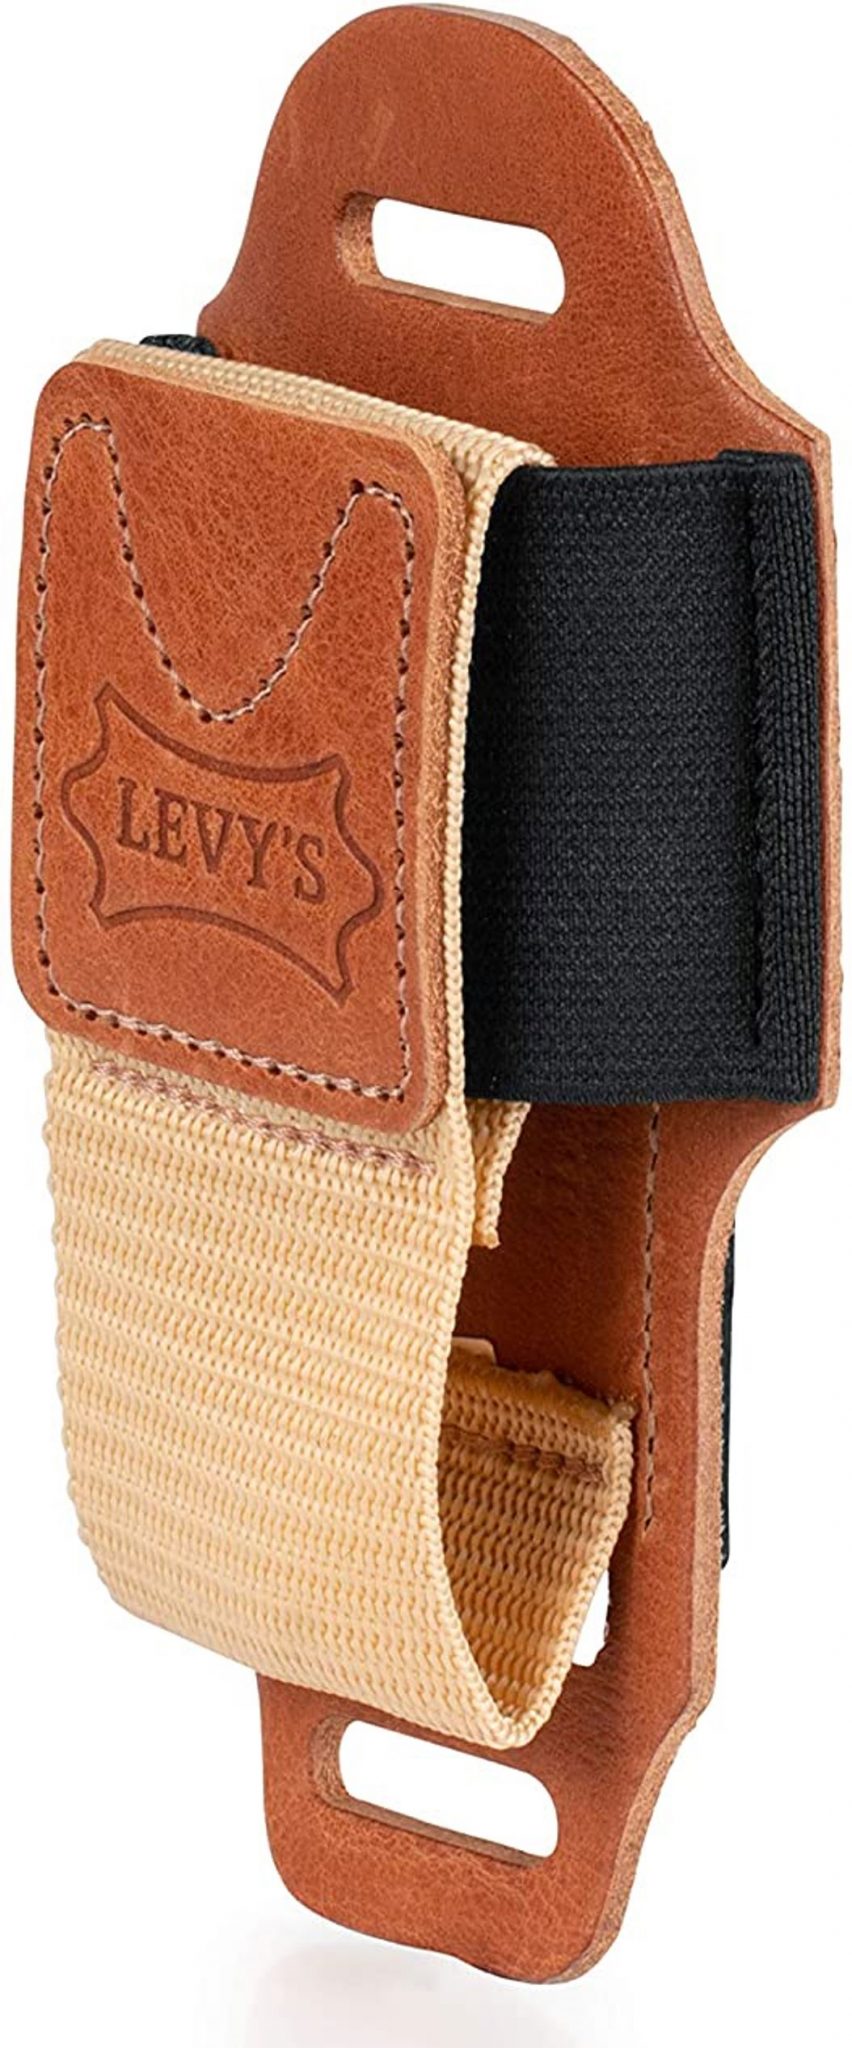 Photo4Less | Levy's Leathers Wireless Transmitter Bodypack Holder – Tan  Leather